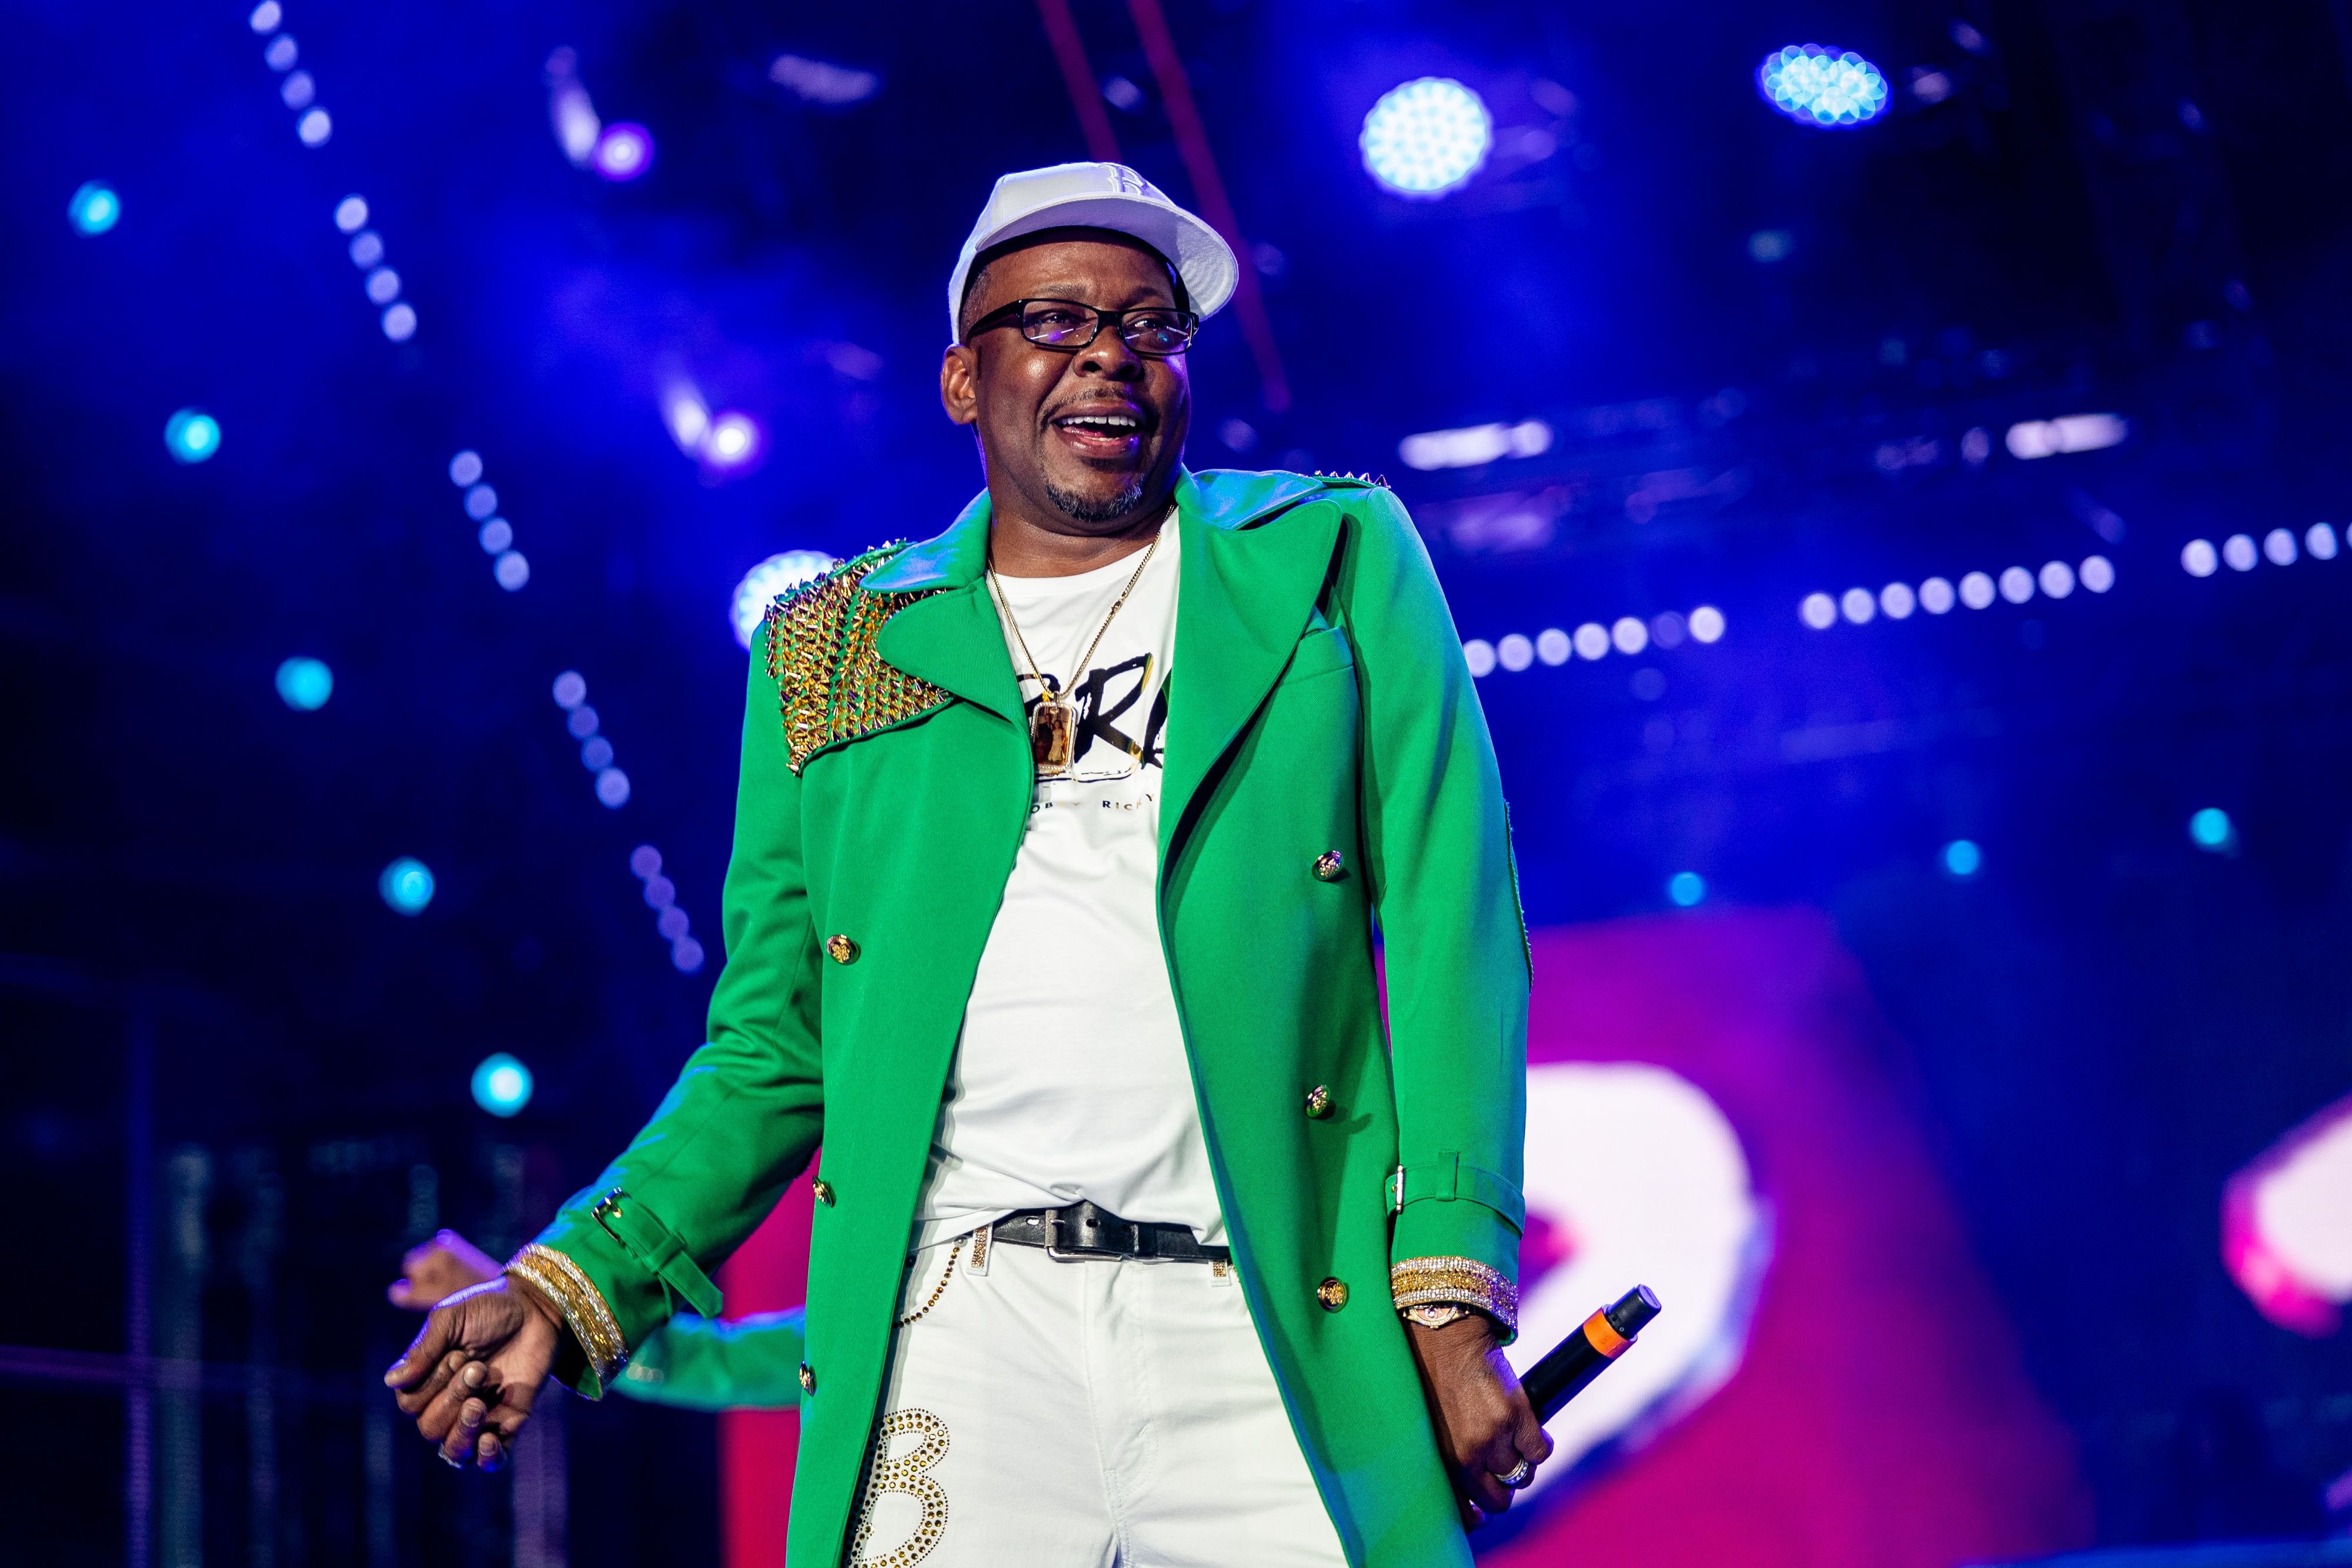 Bobby Brown of RBRM performs during the 25th Essence Festival at the Mercedes-Benz Superdome on July 5, 2019 in New Orleans, Louisiana. | Source: Getty Images